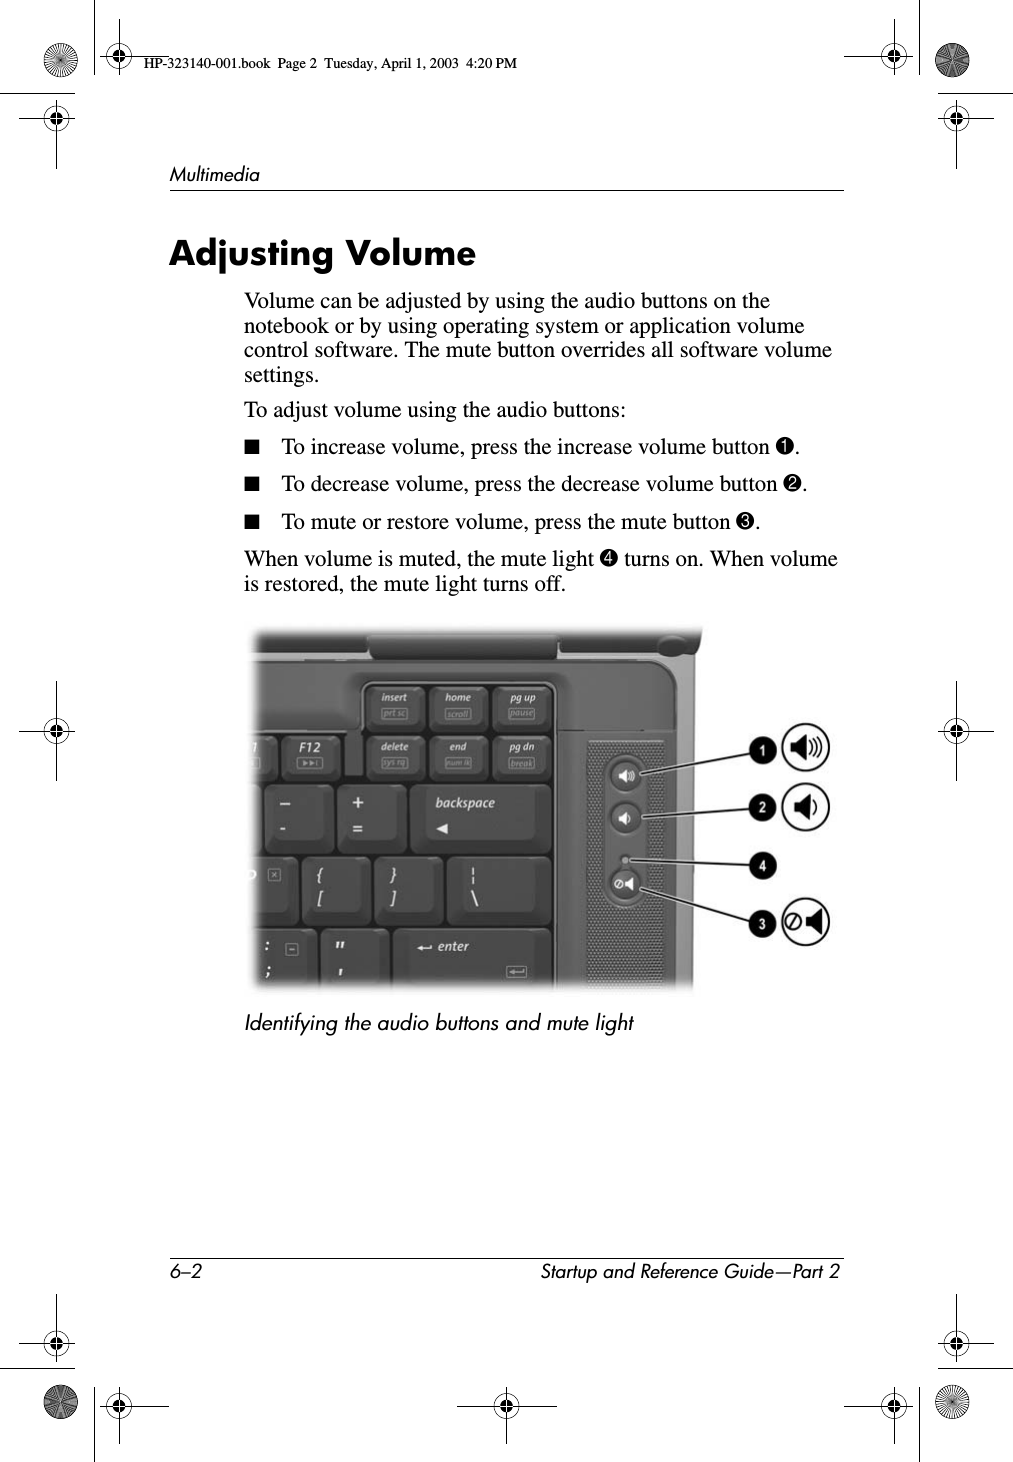 6–2 Startup and Reference Guide—Part 2MultimediaAdjusting VolumeVolume can be adjusted by using the audio buttons on the notebook or by using operating system or application volume control software. The mute button overrides all software volume settings.To adjust volume using the audio buttons:■To increase volume, press the increase volume button 1.■To decrease volume, press the decrease volume button 2.■To mute or restore volume, press the mute button 3.When volume is muted, the mute light 4 turns on. When volume is restored, the mute light turns off.Identifying the audio buttons and mute lightHP-323140-001.book  Page 2  Tuesday, April 1, 2003  4:20 PM